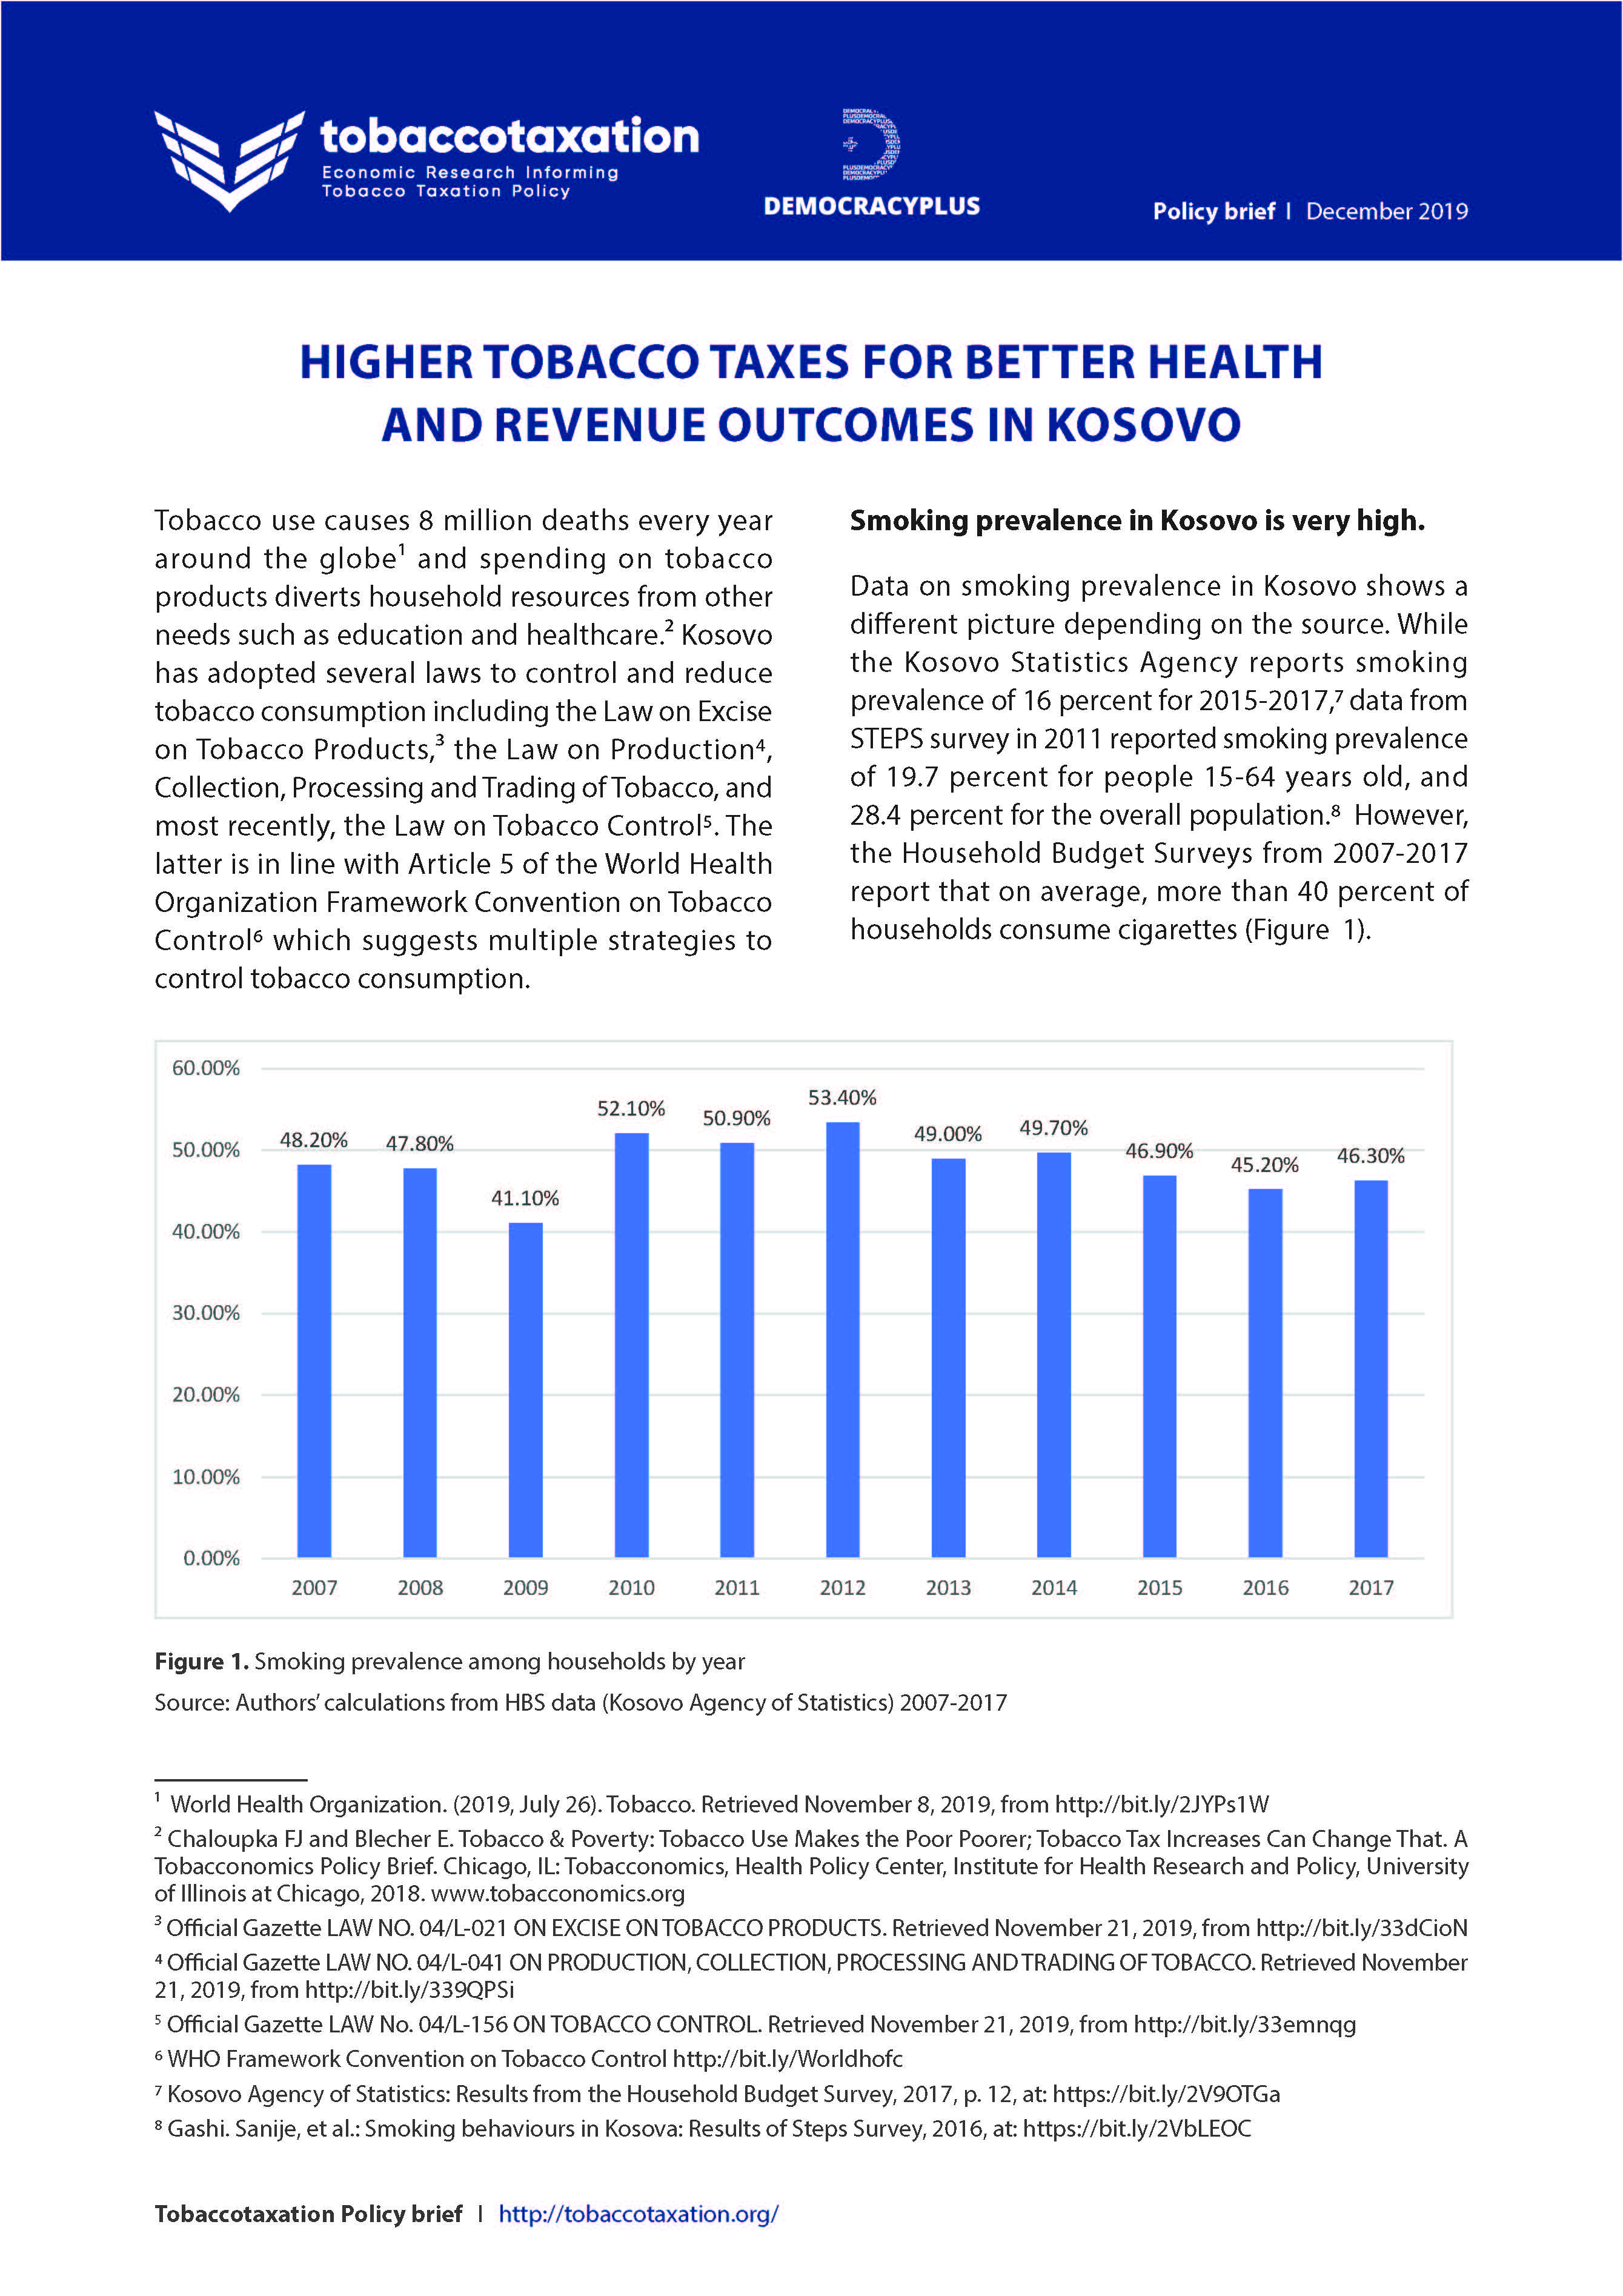 Higher Tobacco Taxes for Better Health and Revenue Outcomes in Kosovo